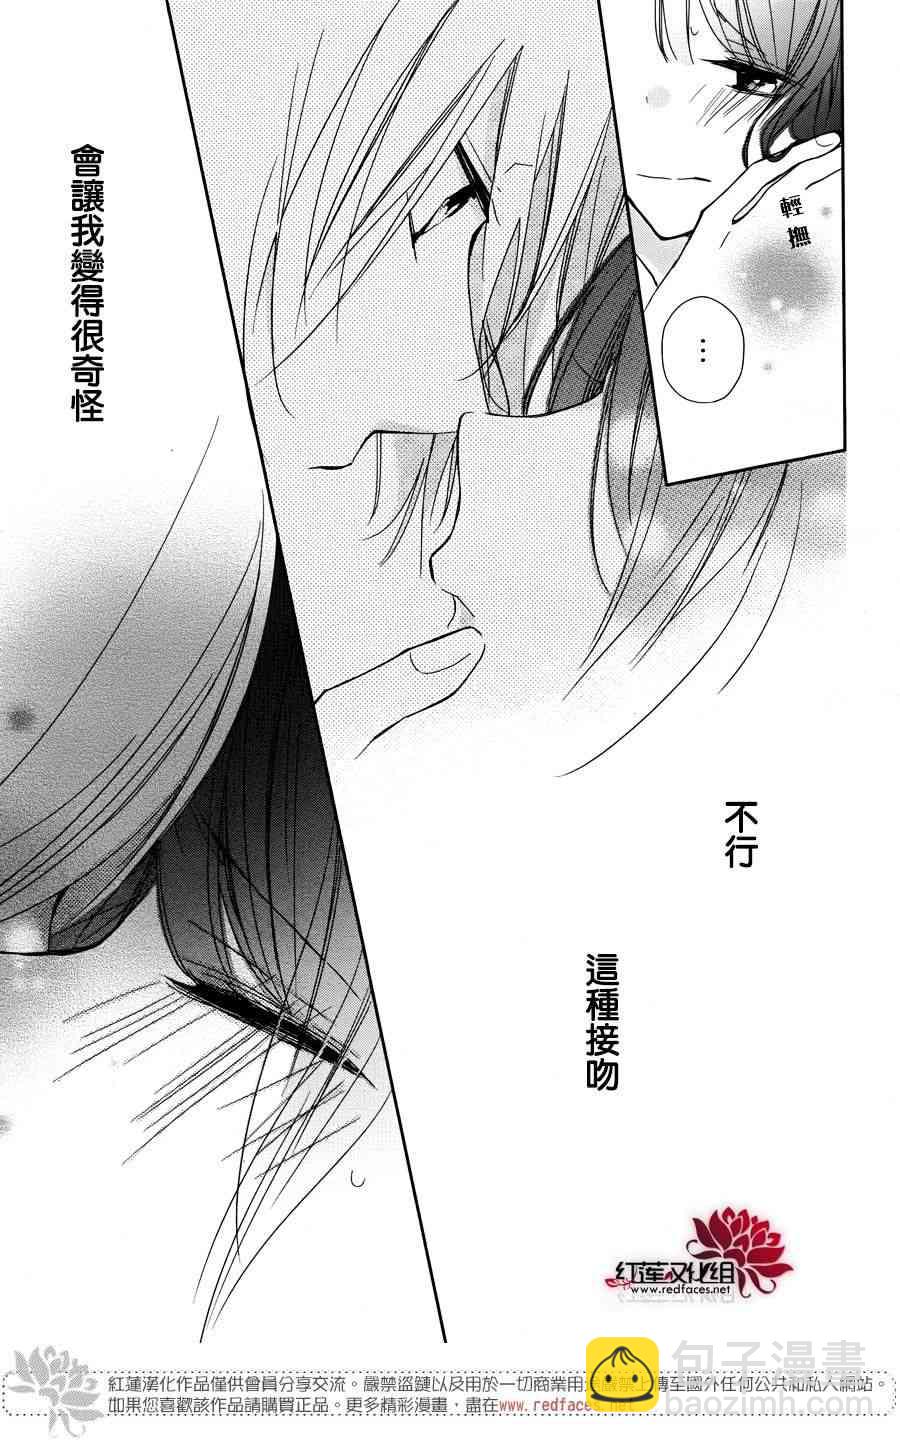 If given a second chance - 2話 - 3